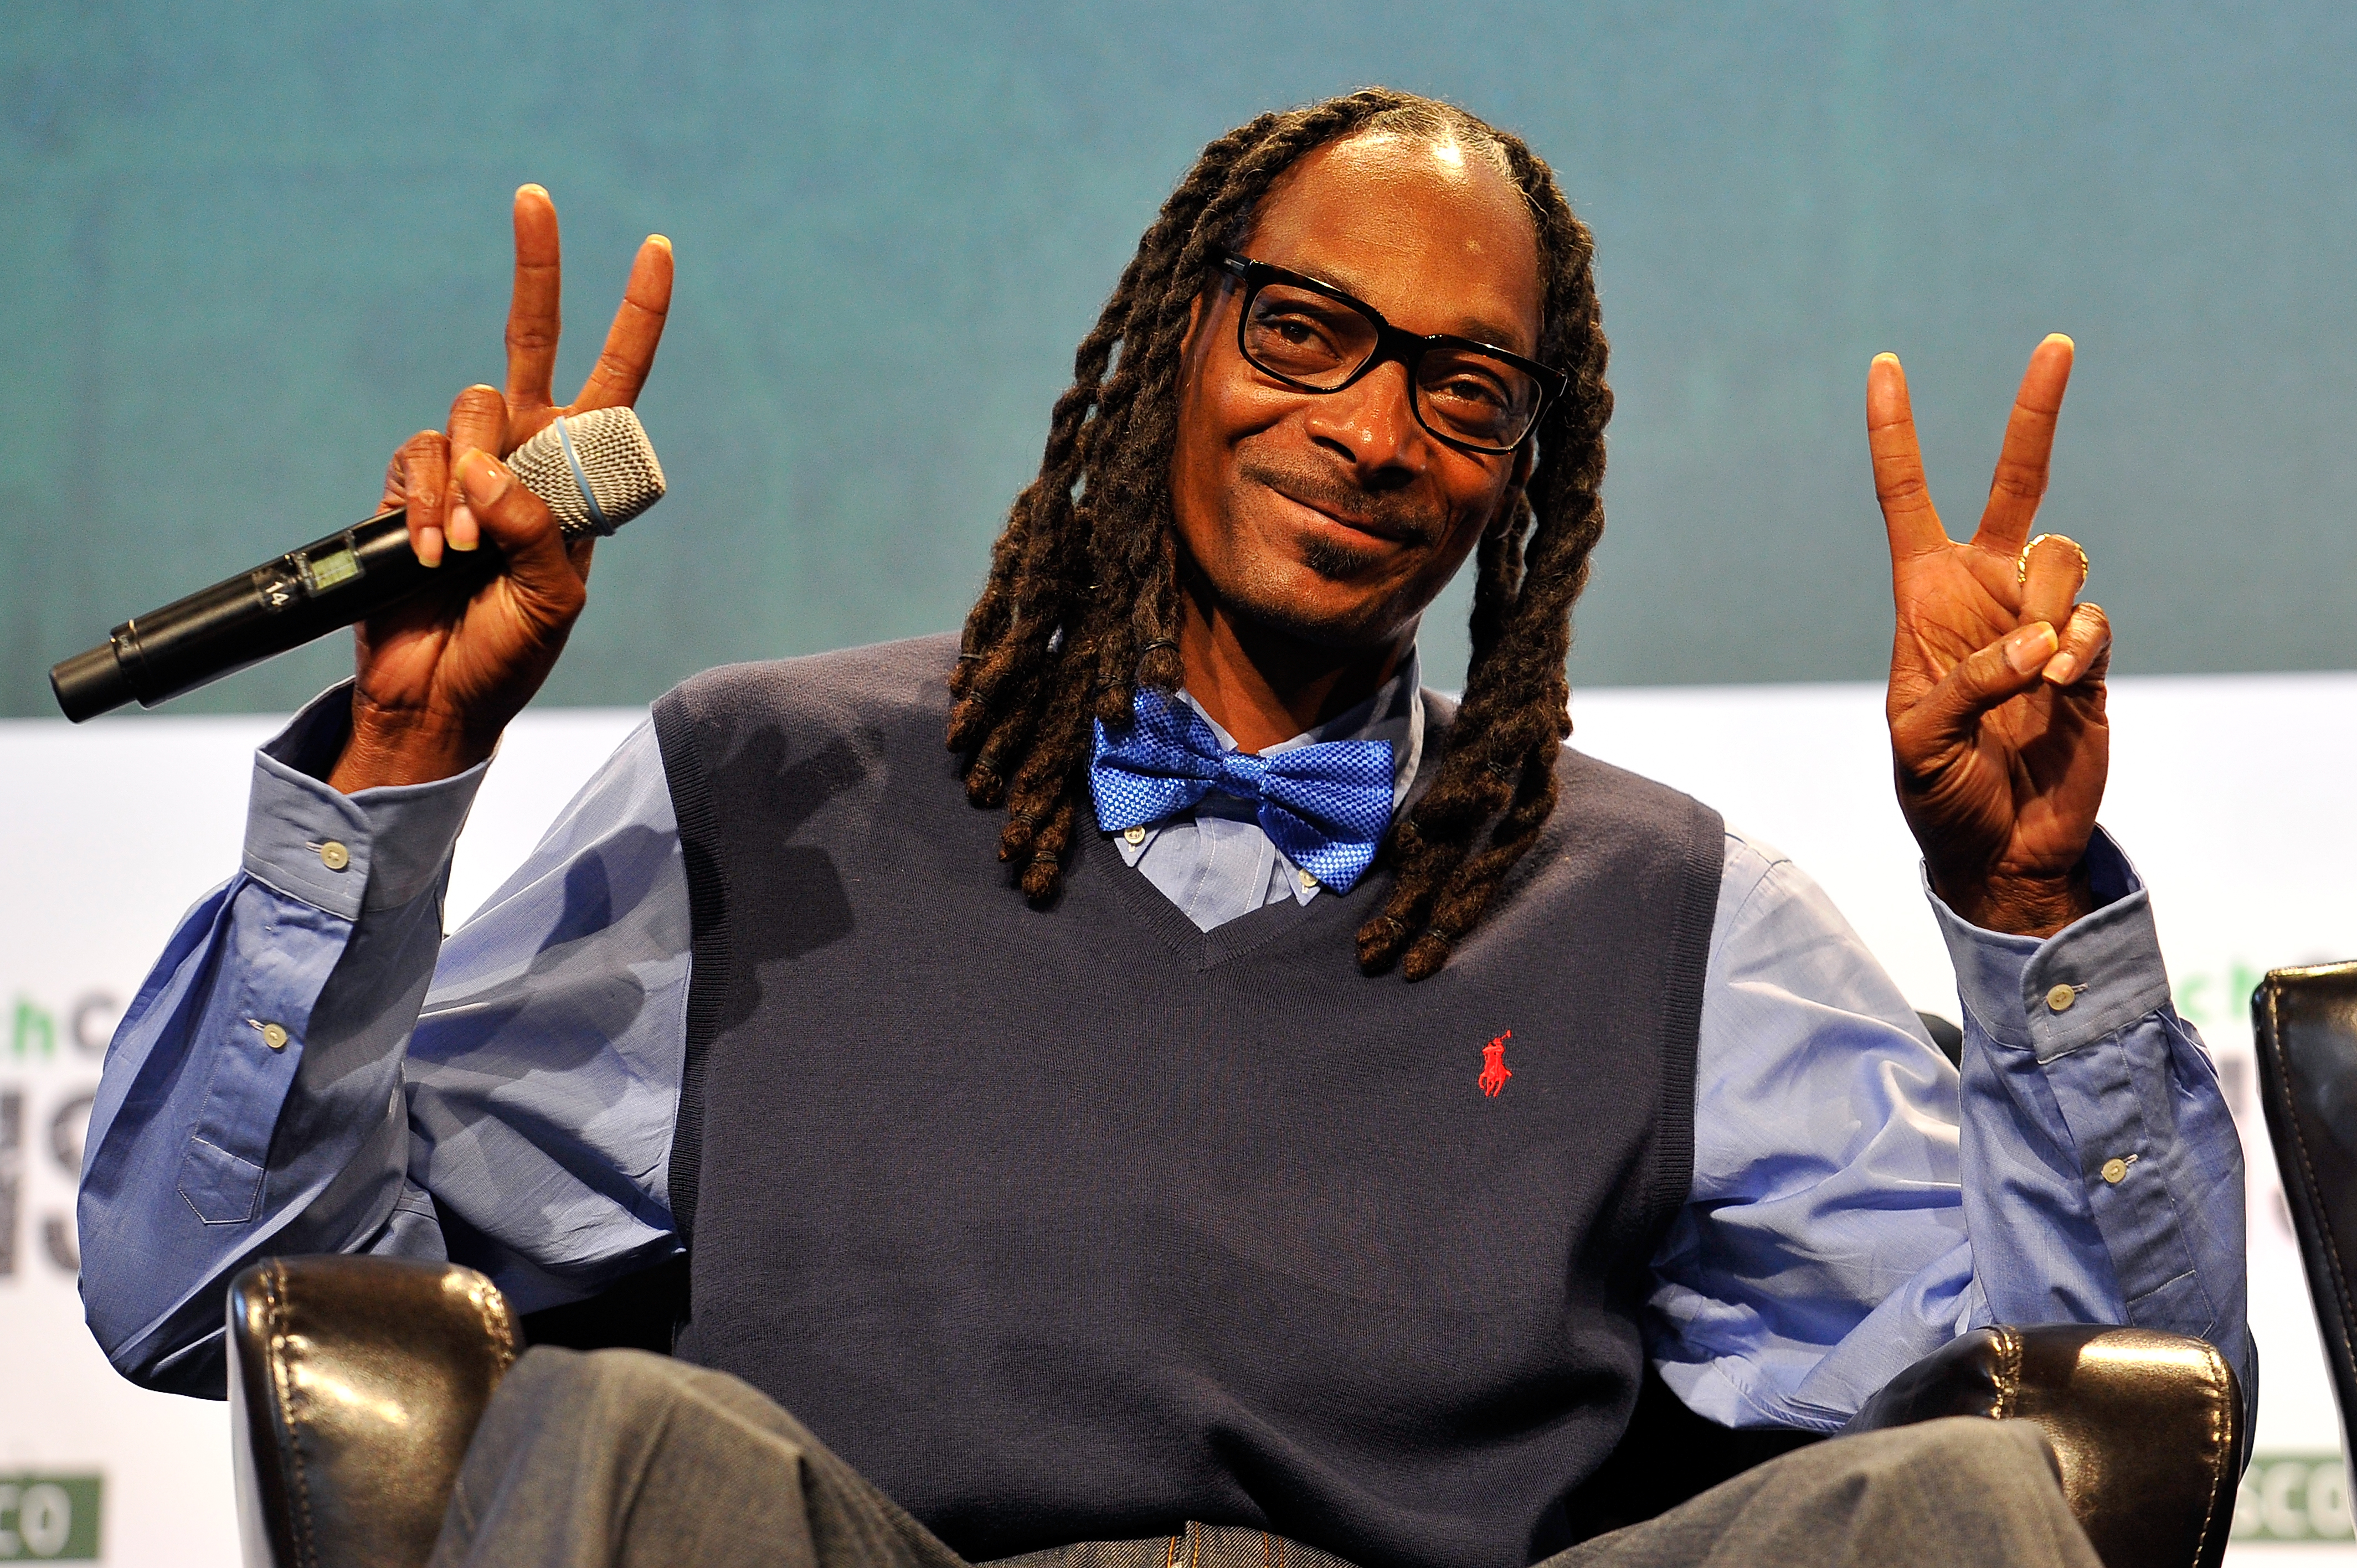 Snoop Dogg's Personal Life and Family